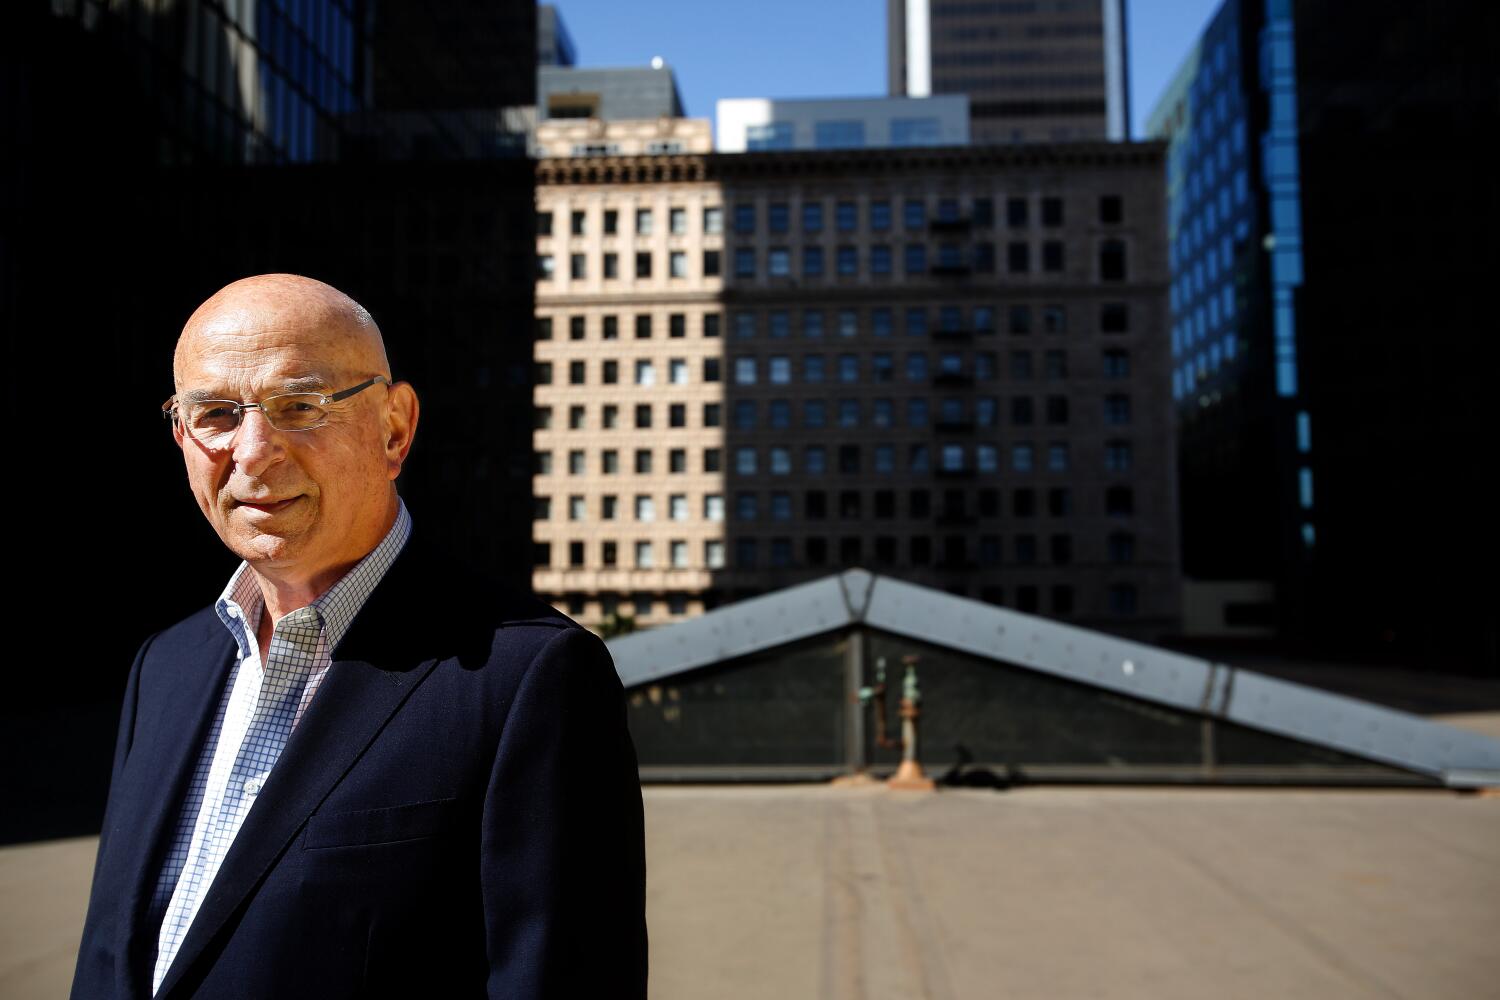 Wayne Ratkovich, developer who saved some of L.A.'s best-known architectural gems, dies at 82.